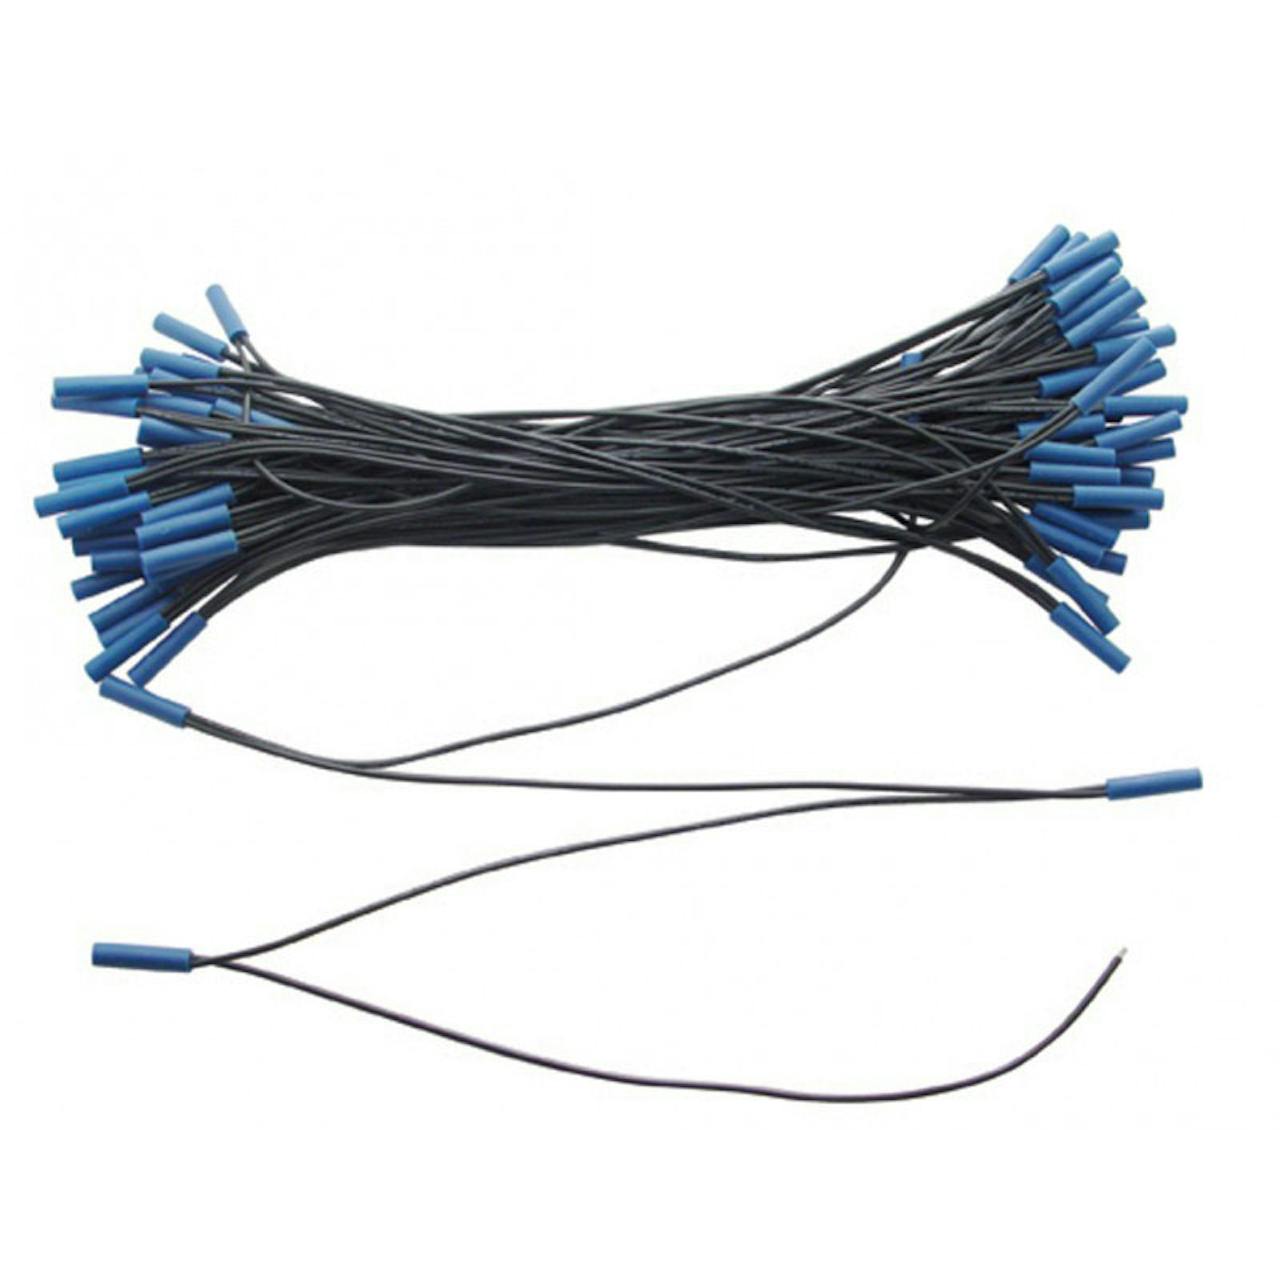 https://raneys-cdn11.imgix.net/images/stencil/original/products/193833/95307/Wire_Harness_.180_Female_Plug_100ft_View2_UPI34249__99441.1658423854.jpg?auto=compress,format&w=1280